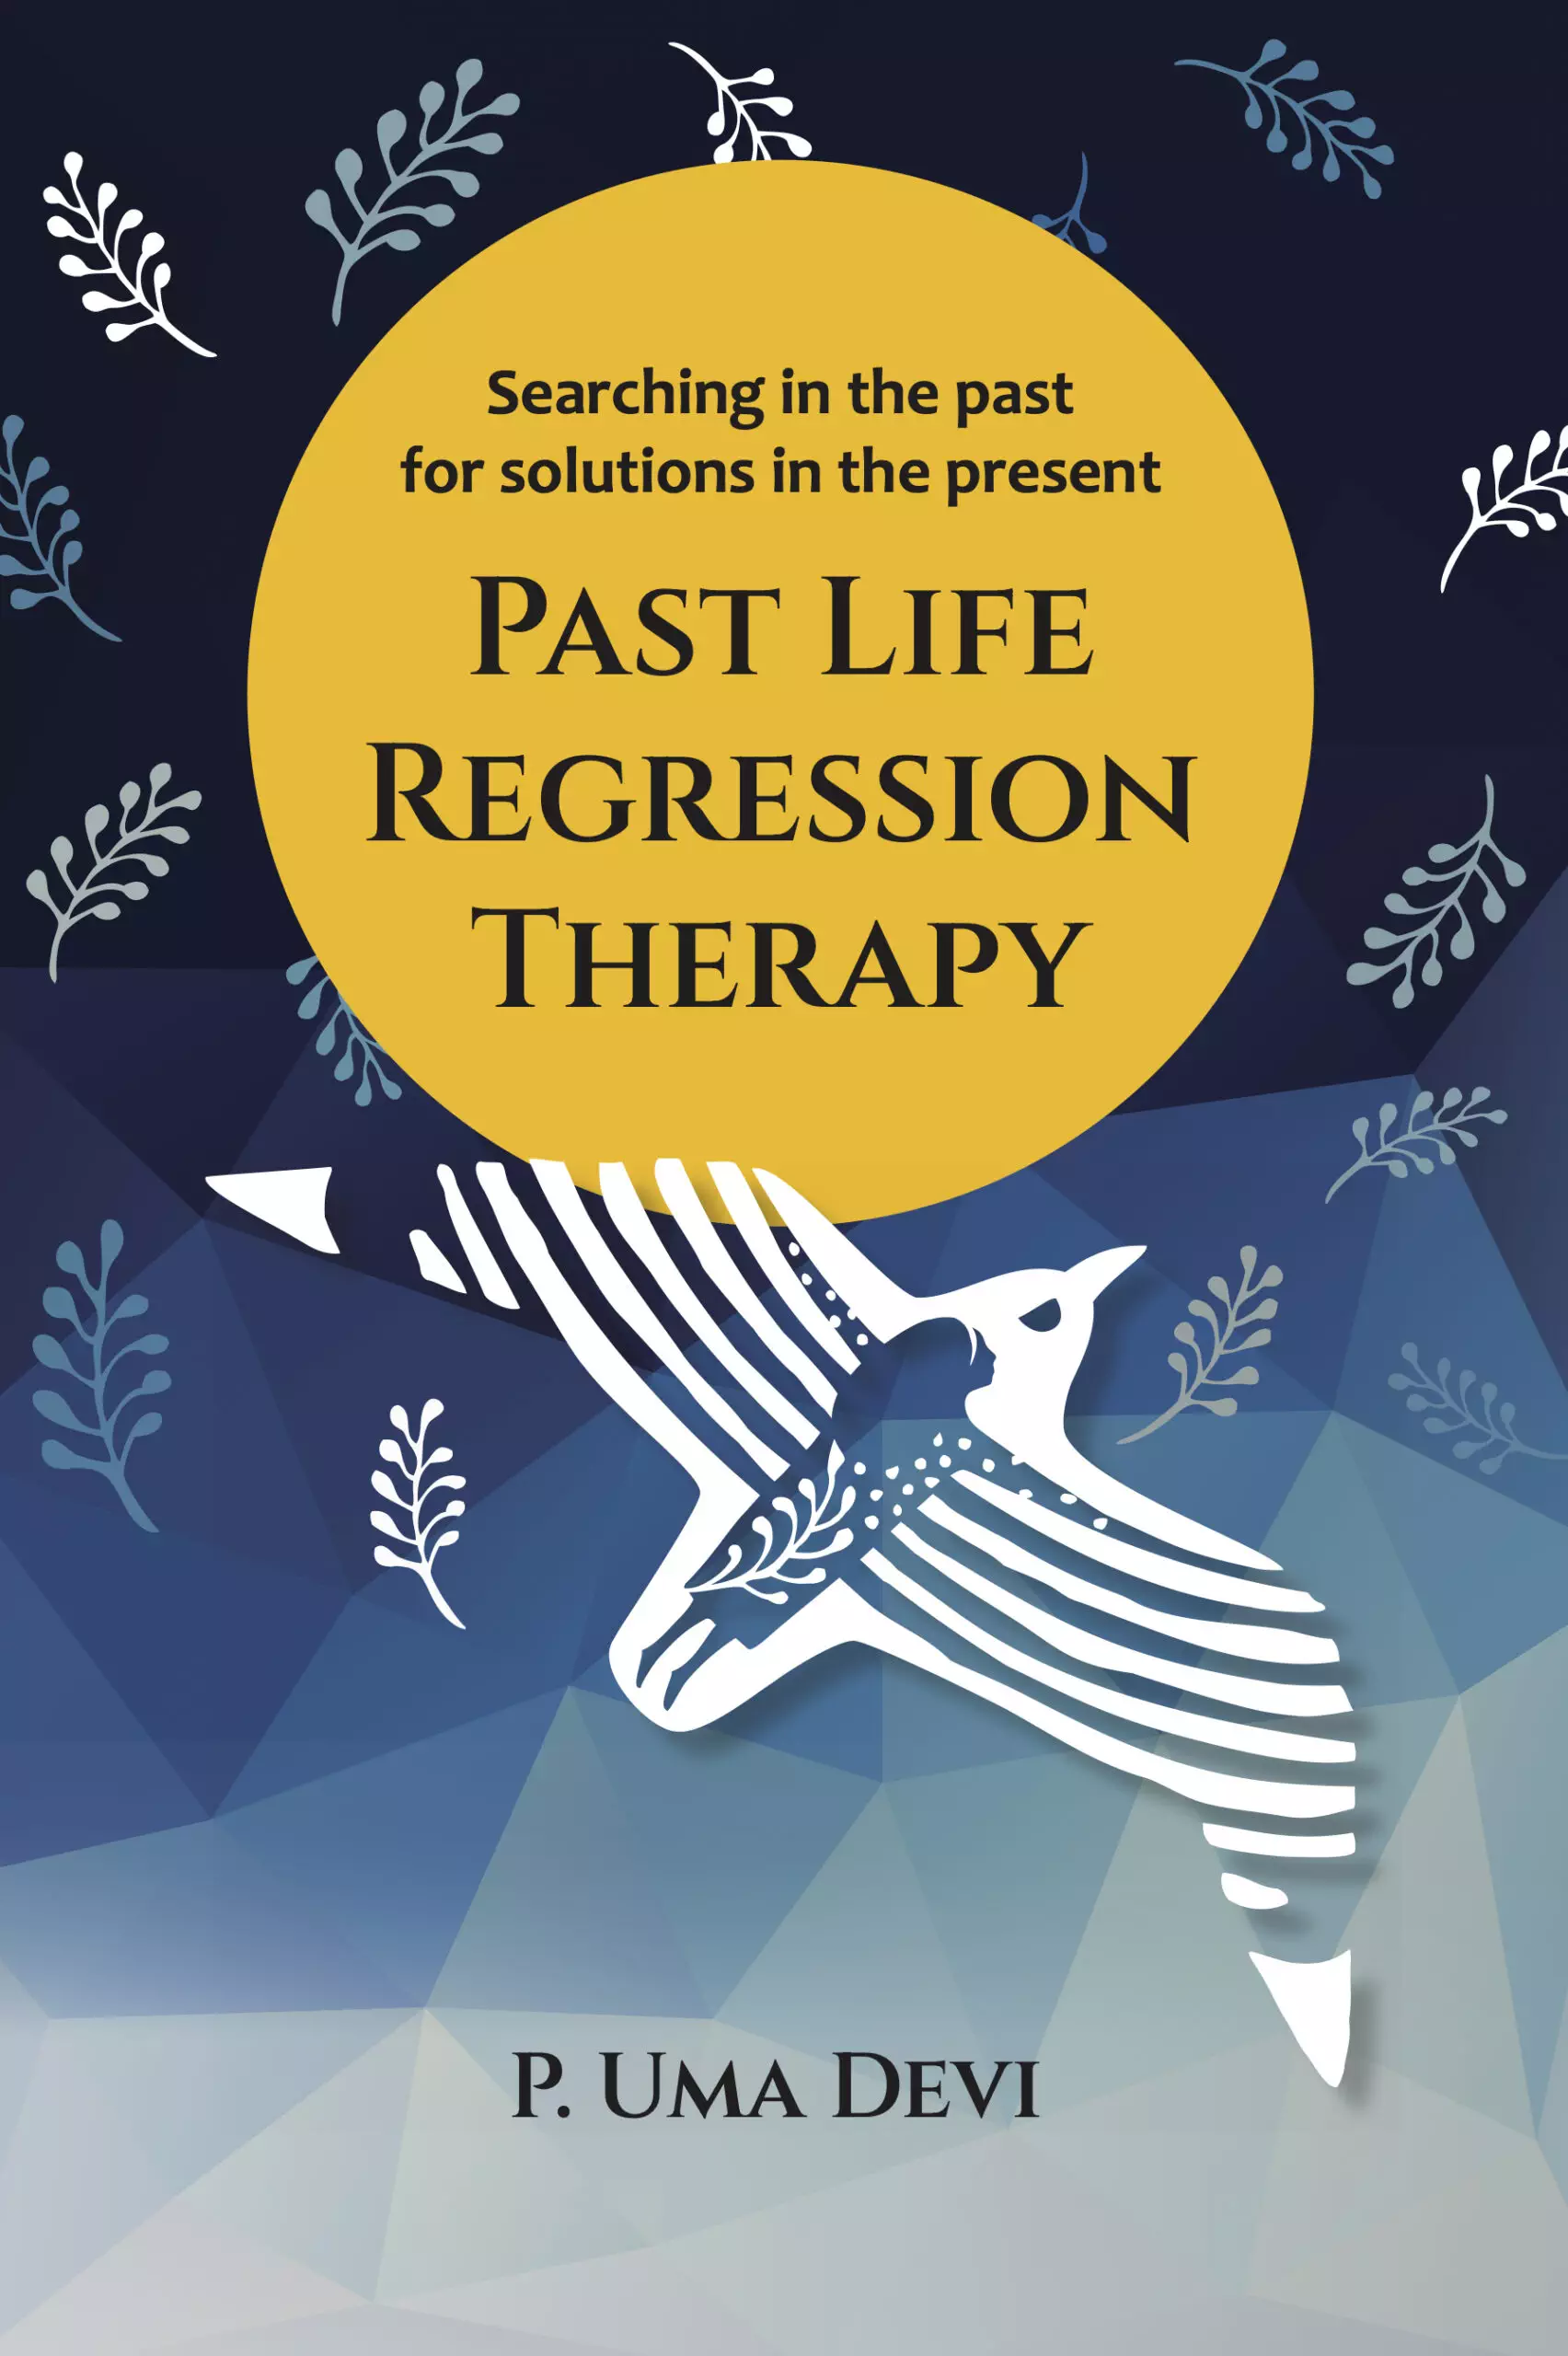 Past Life Regression Therapy - Searching in the past for solutions in the present